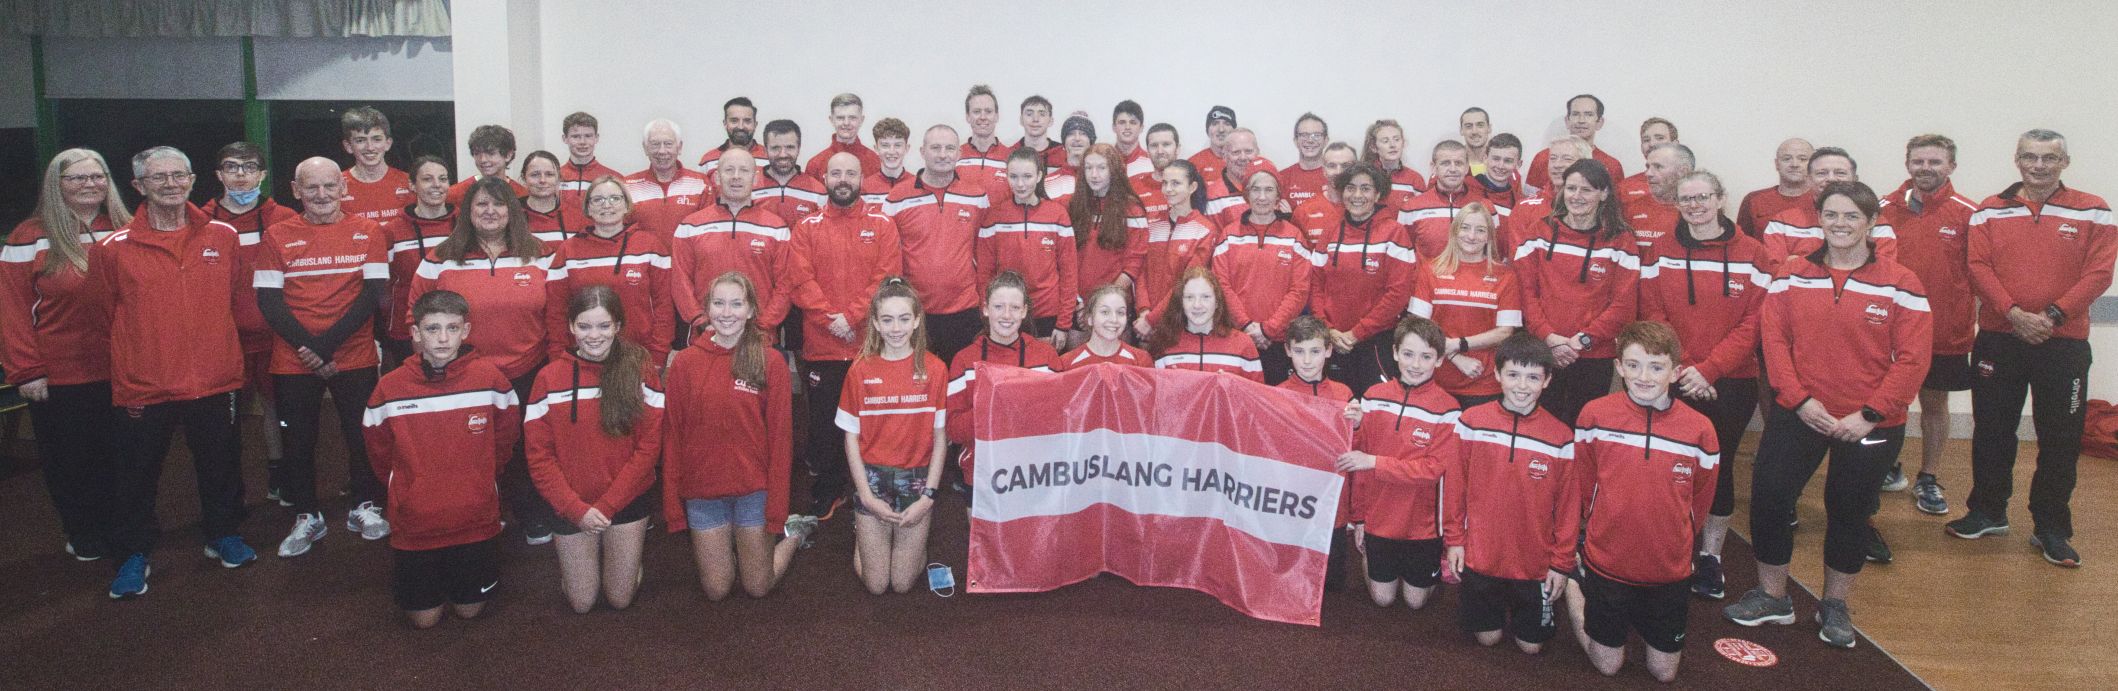 Members of Cambuslang Harriers showing off the new club kit 2021